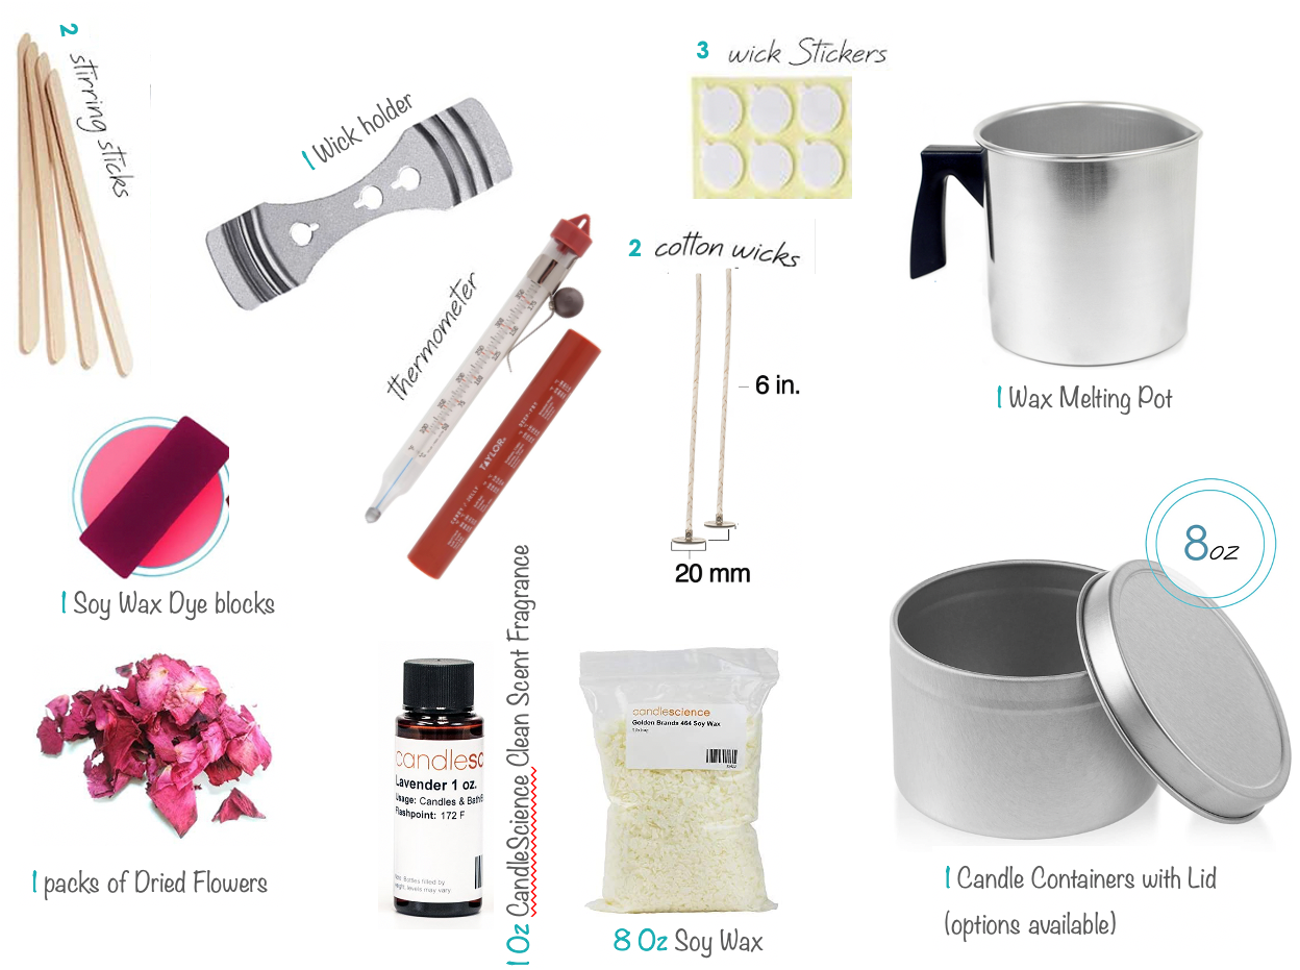 Complete Candle Making Kit